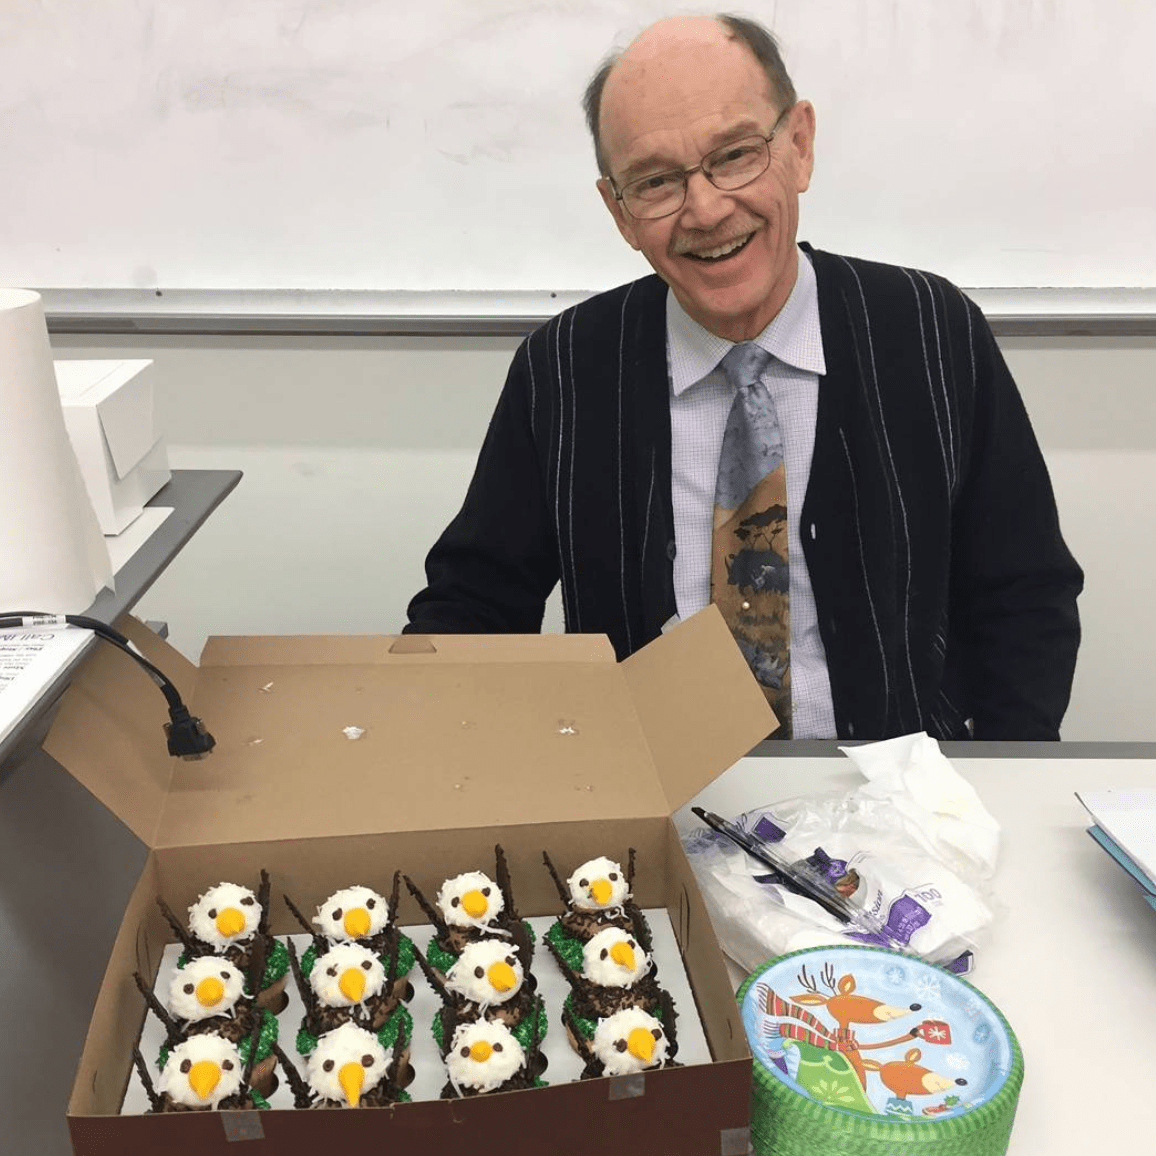 James Spotila, PhD, L. Drew Betz Chair Professor in the College of Arts and Sciences’ Department of Biodiversity, Earth & Environmental Science, with the Eagles cupcakes he brought to his “Endangered Species Conservation” class.